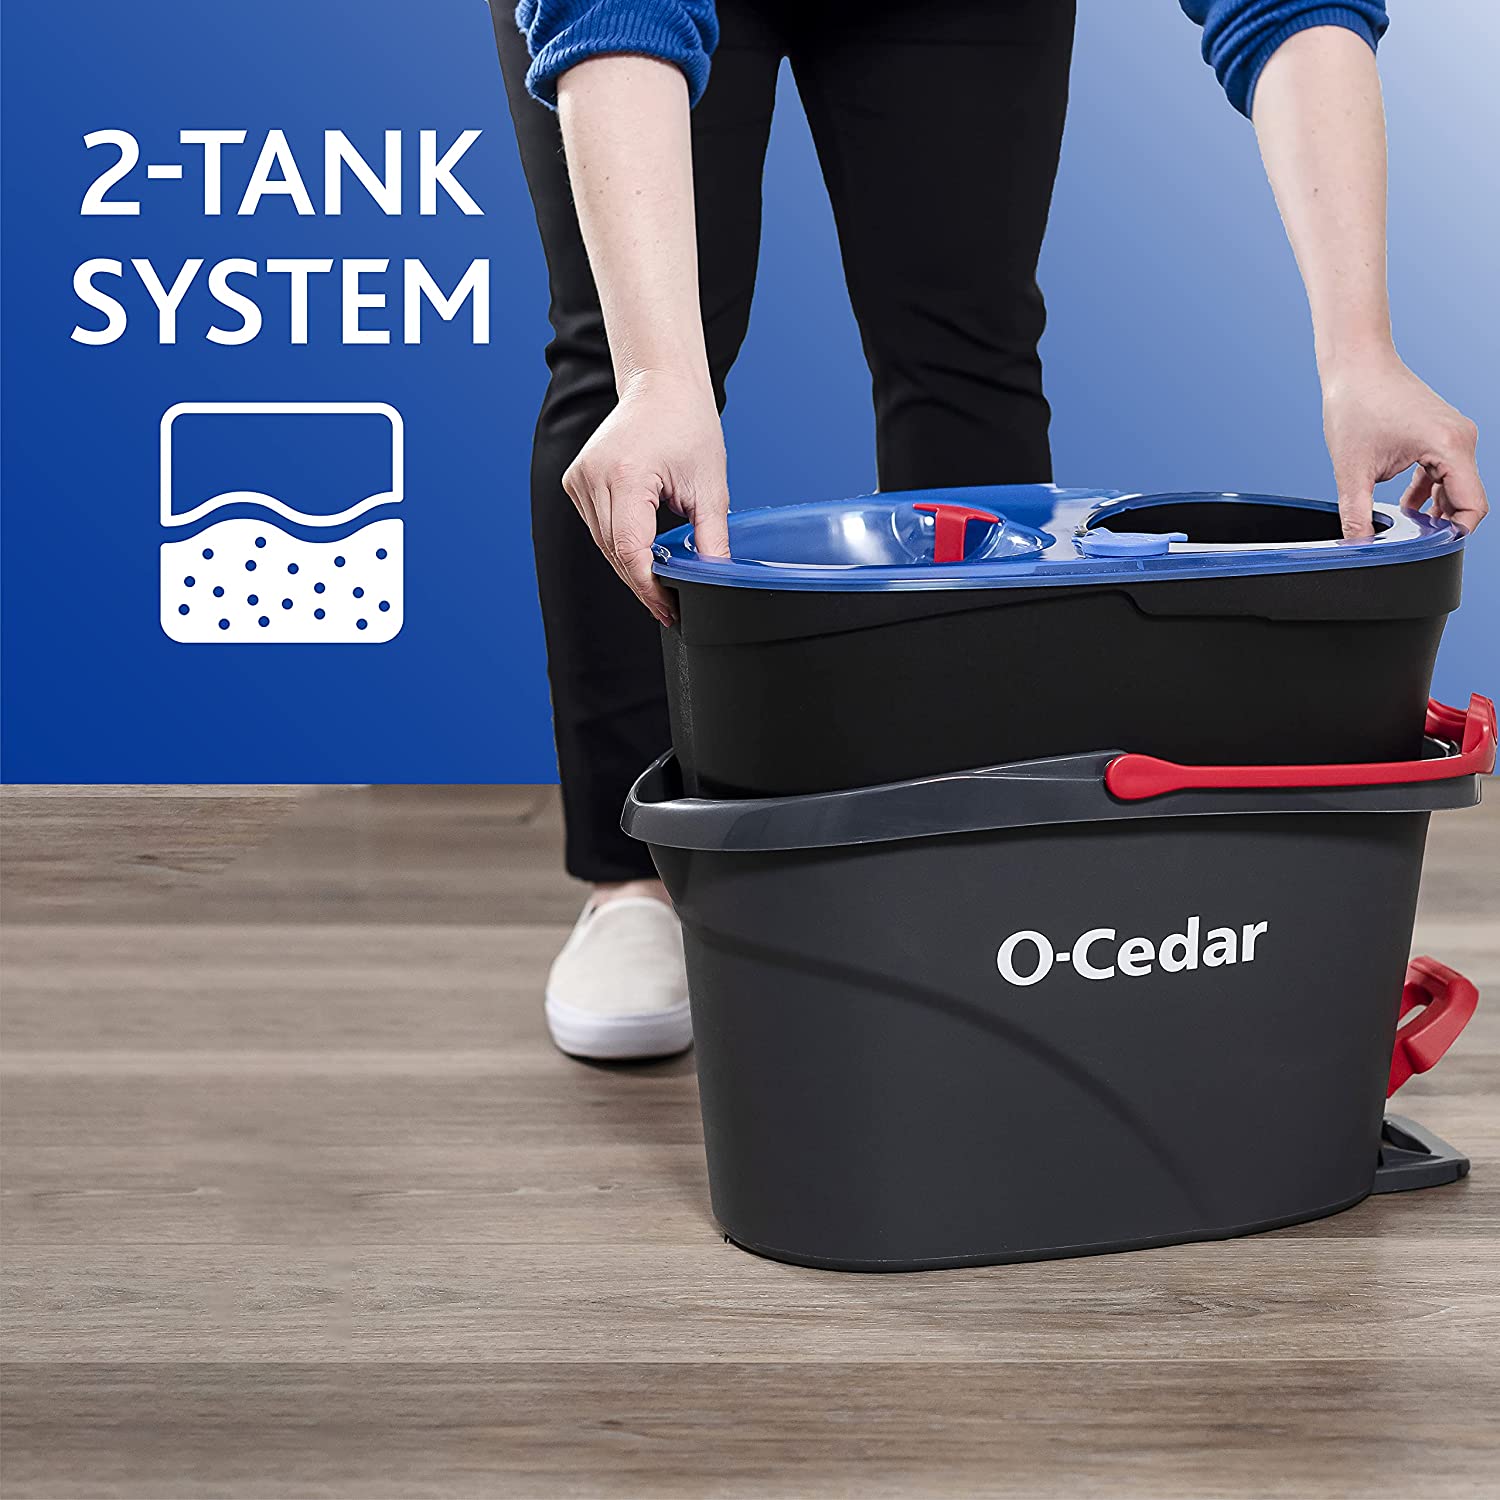 https://bigbigmart.com/wp-content/uploads/2022/12/O-Cedar-EasyWring-RinseClean-Microfiber-Spin-Mop-Bucket-Floor-Cleaning-System-with-2-Extra-Refills-2.jpg